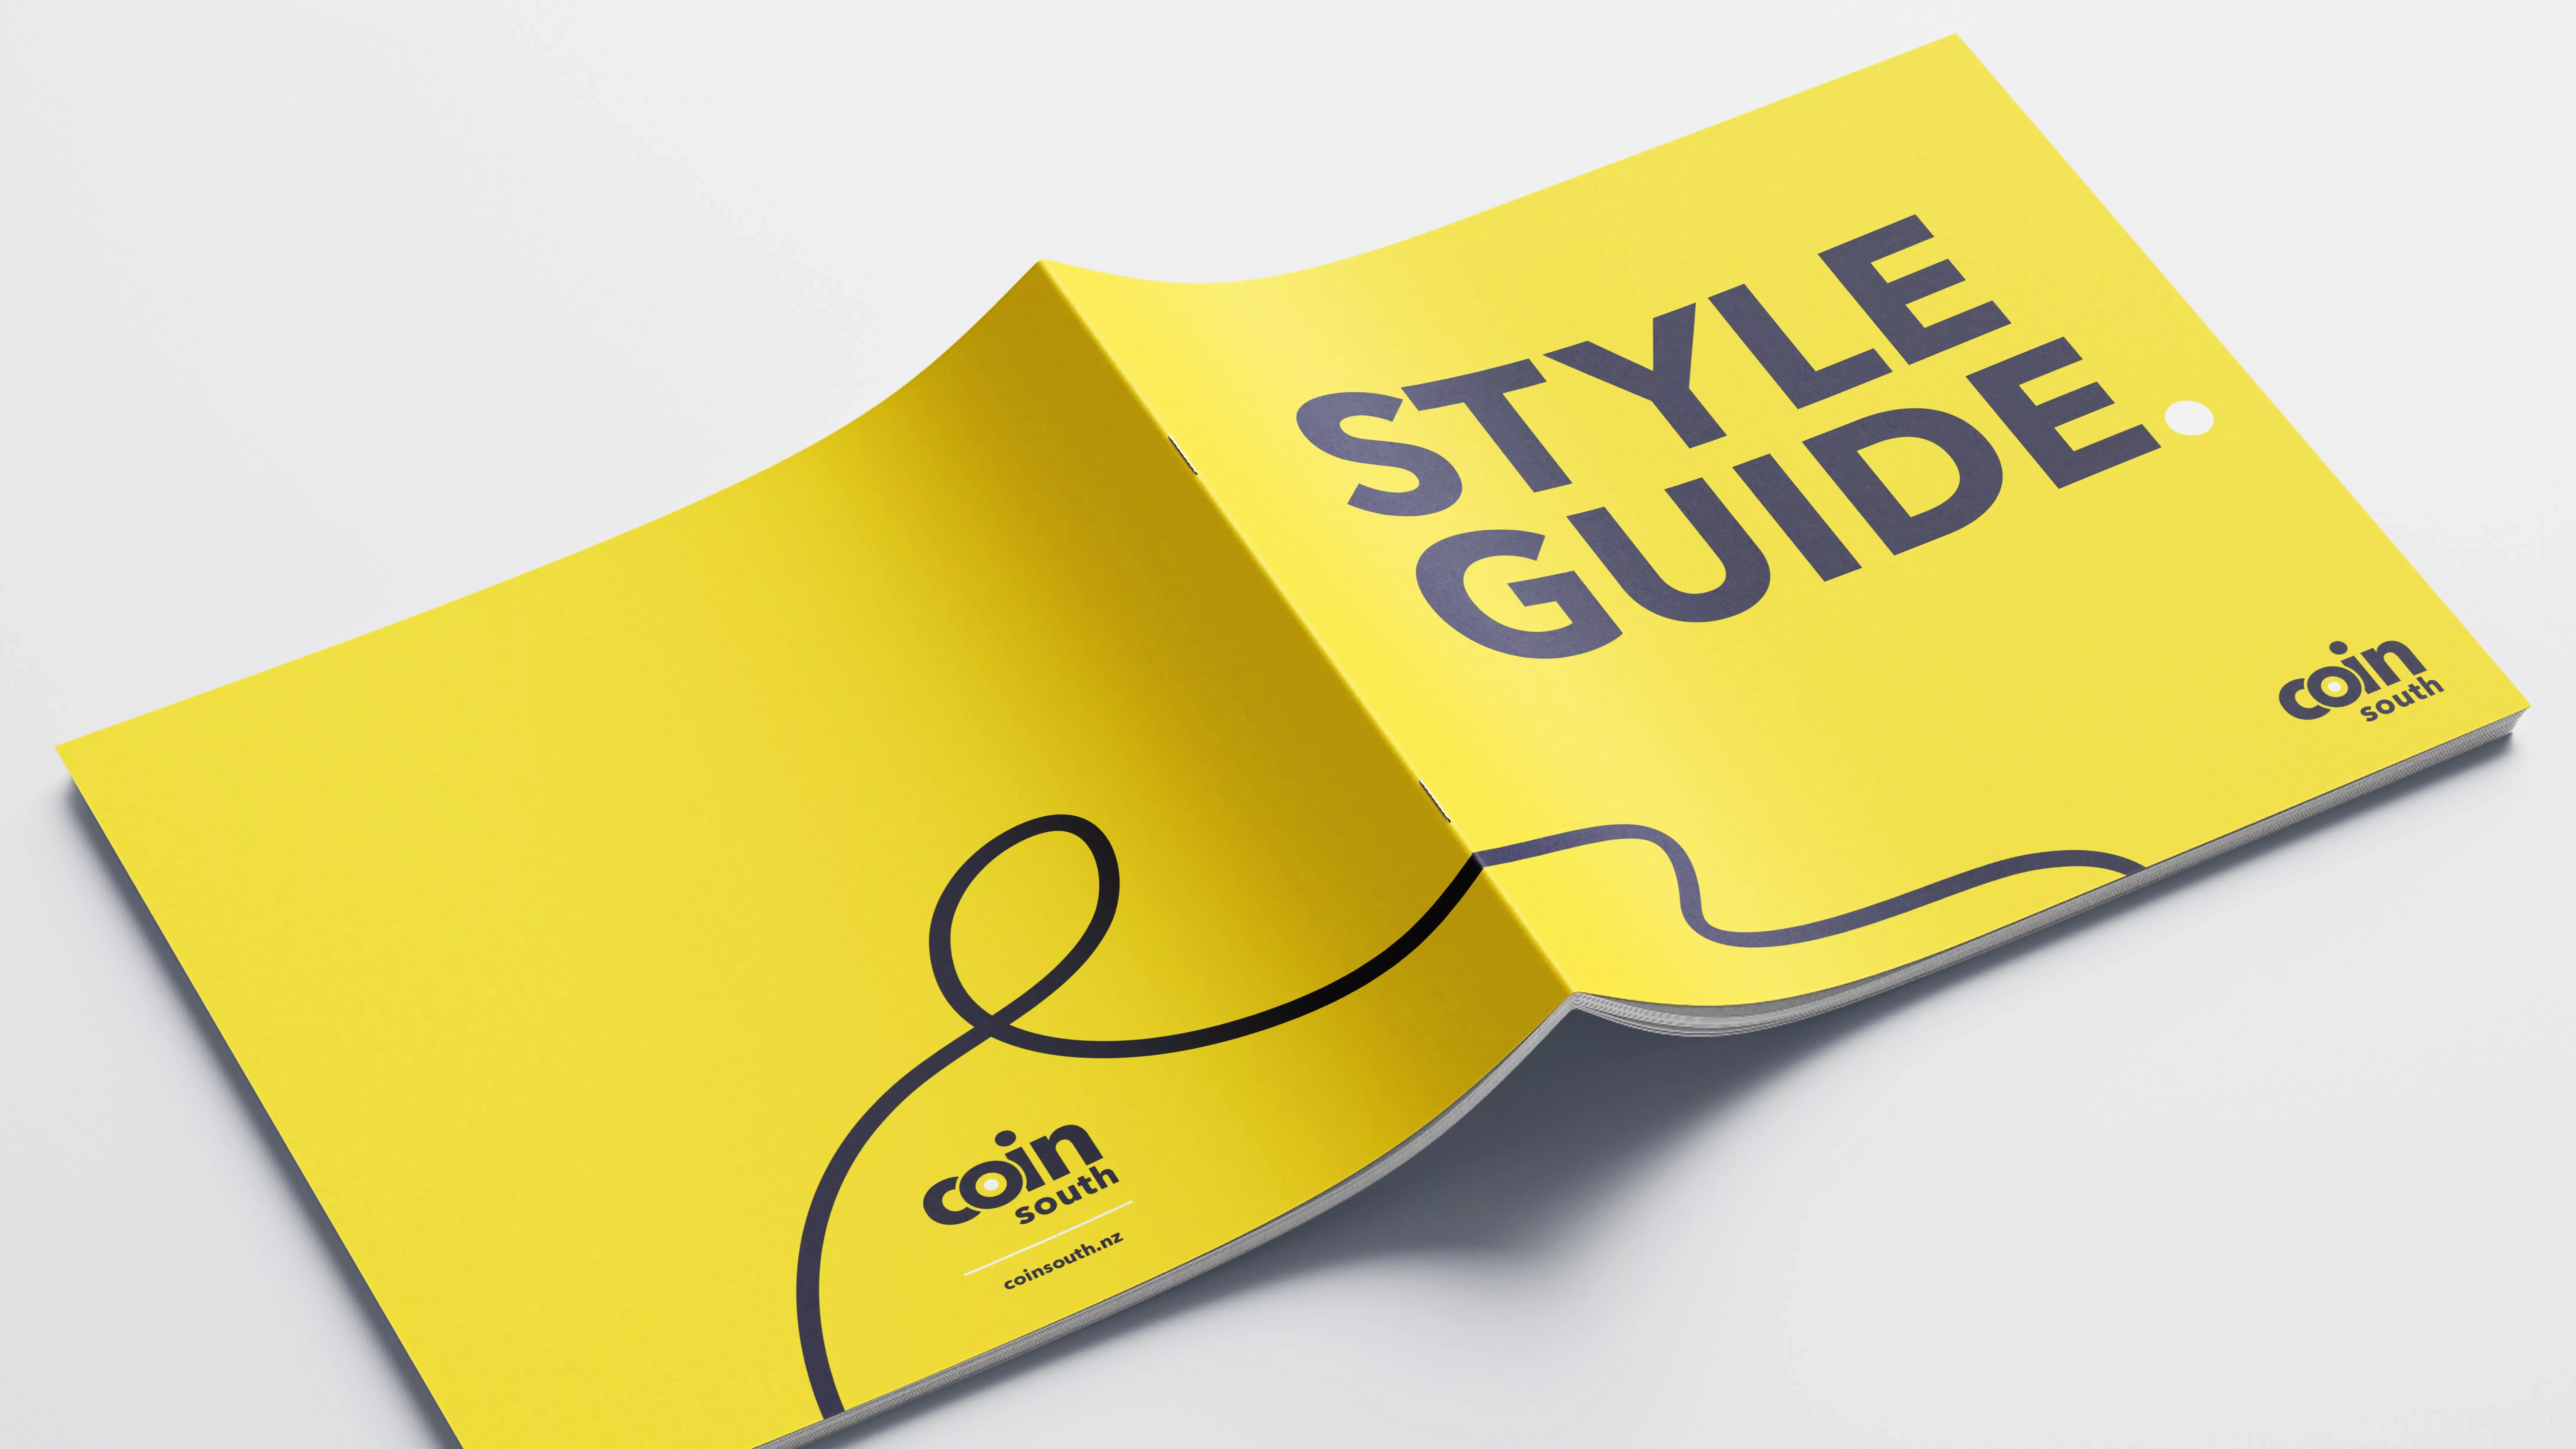 CS Style Guide 1